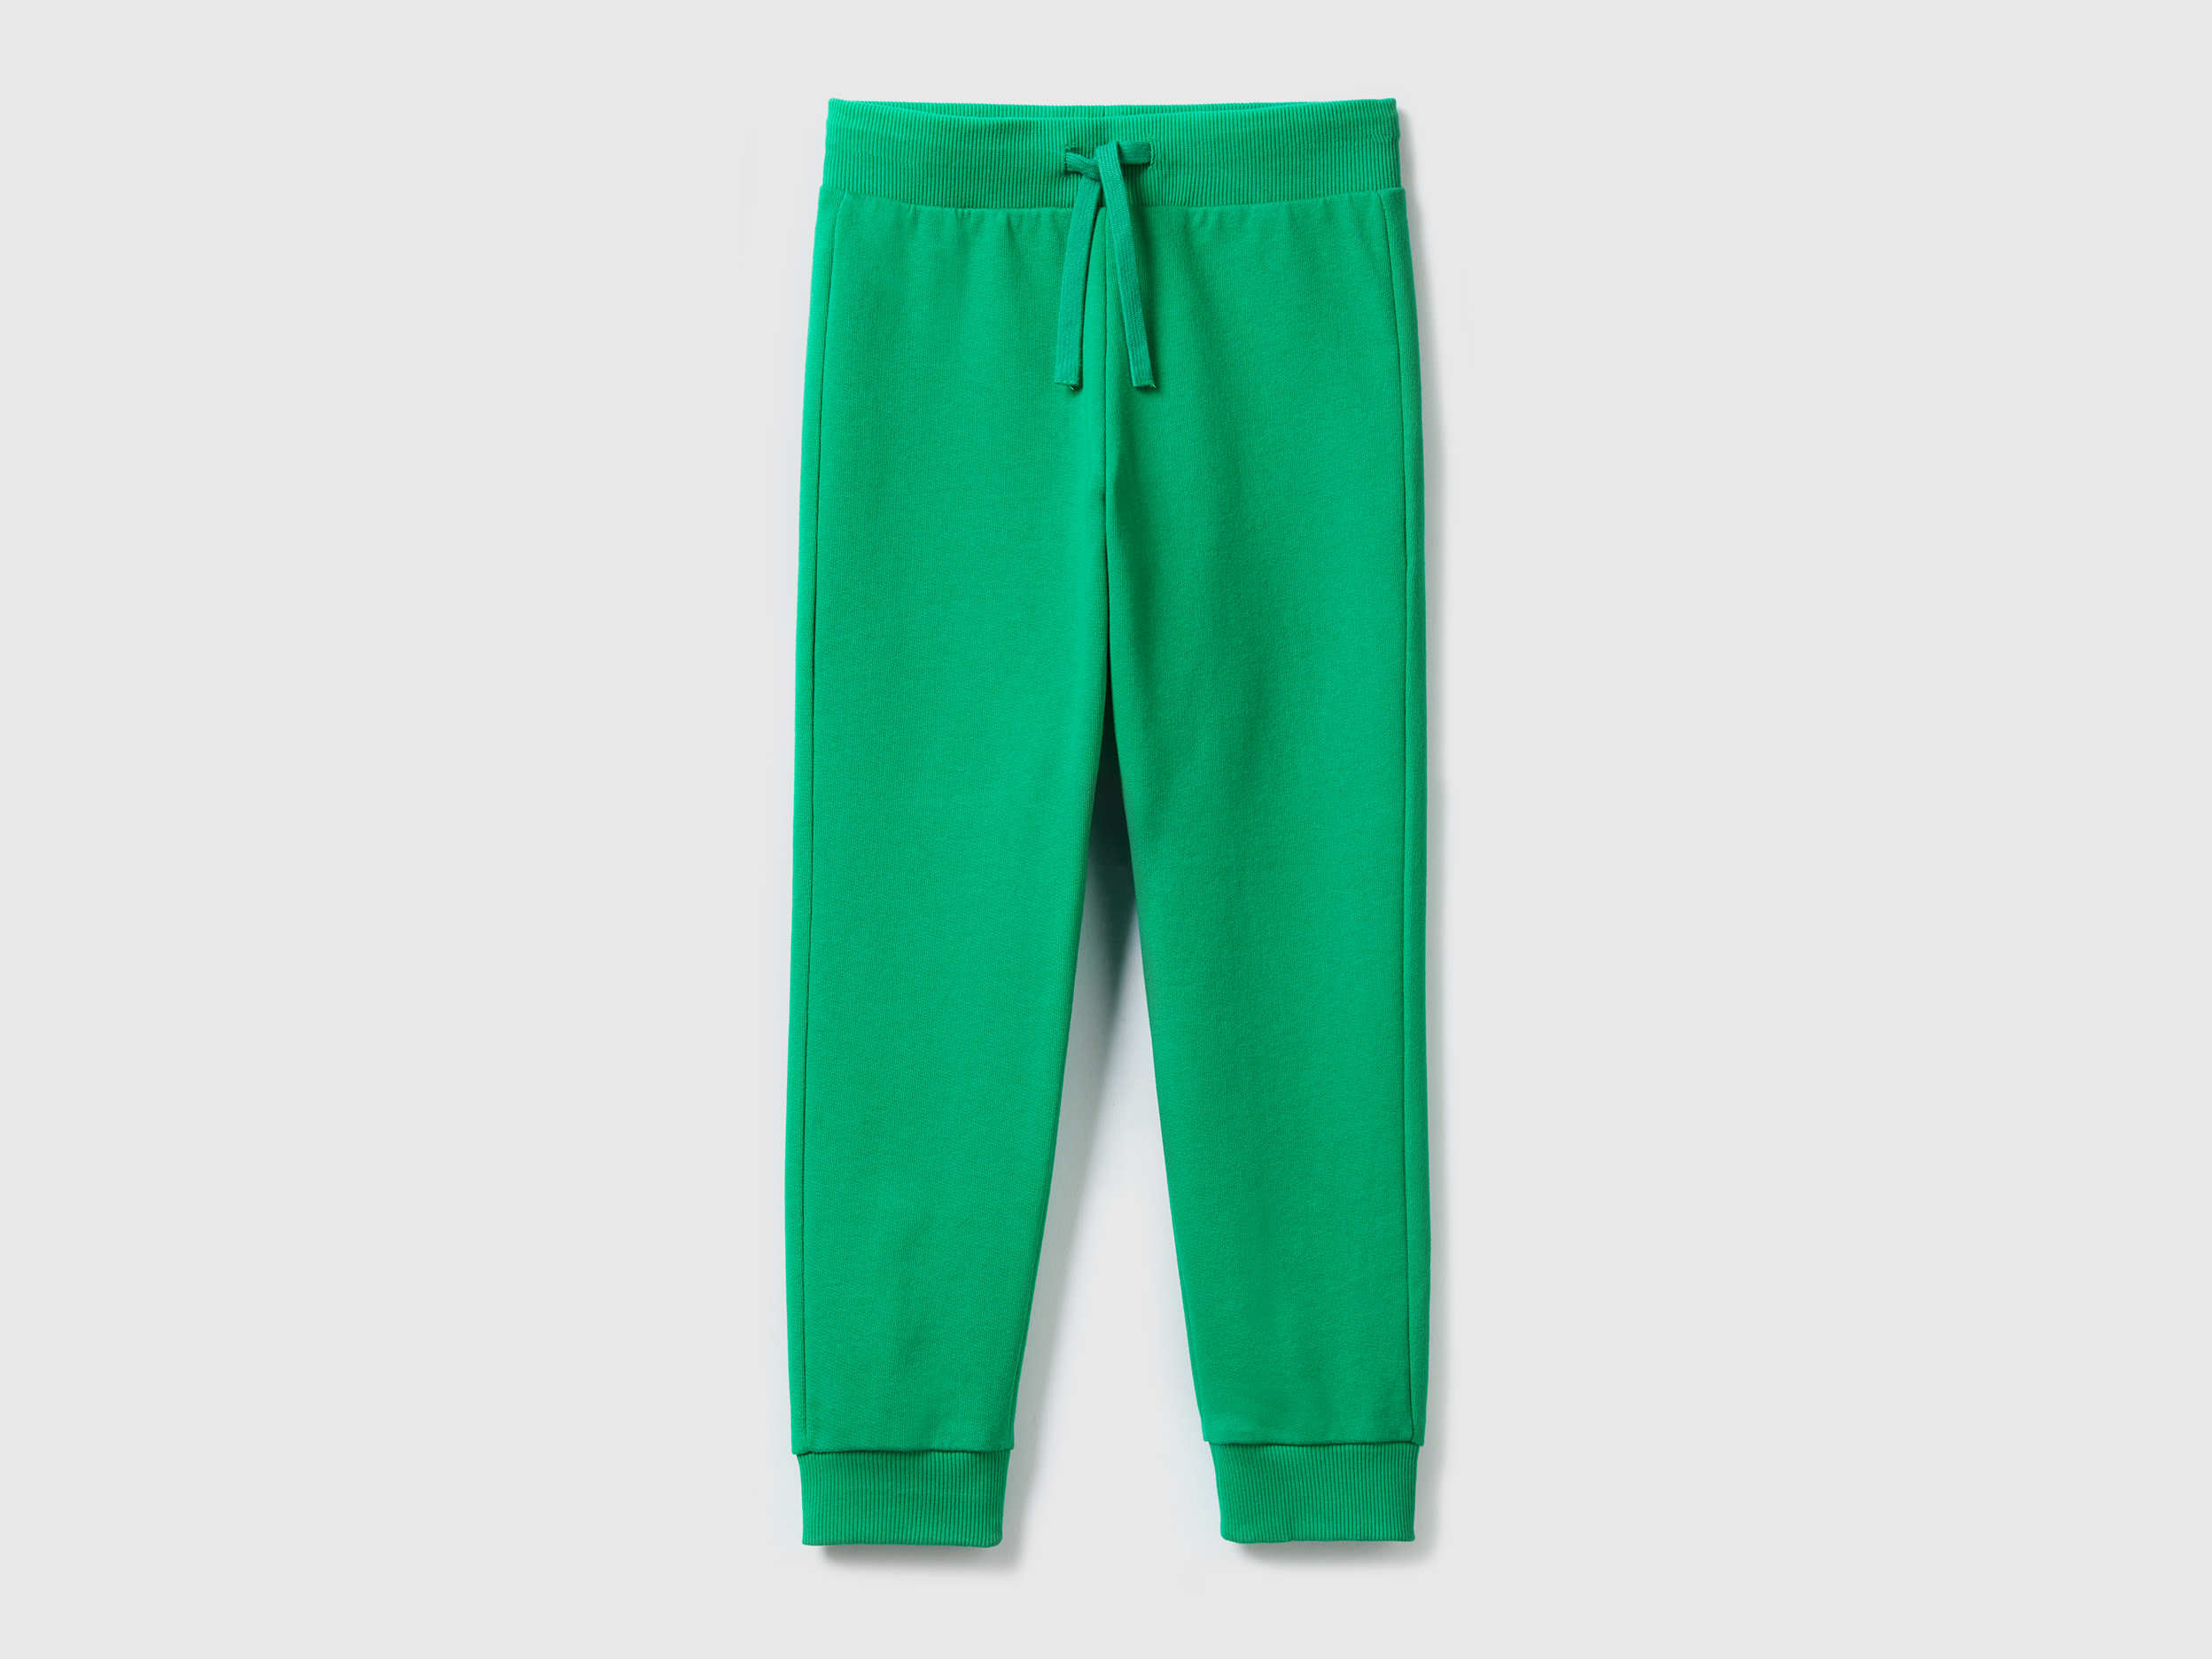 Benetton, Sporty Trousers With Drawstring, size 2XL, Green, Kids